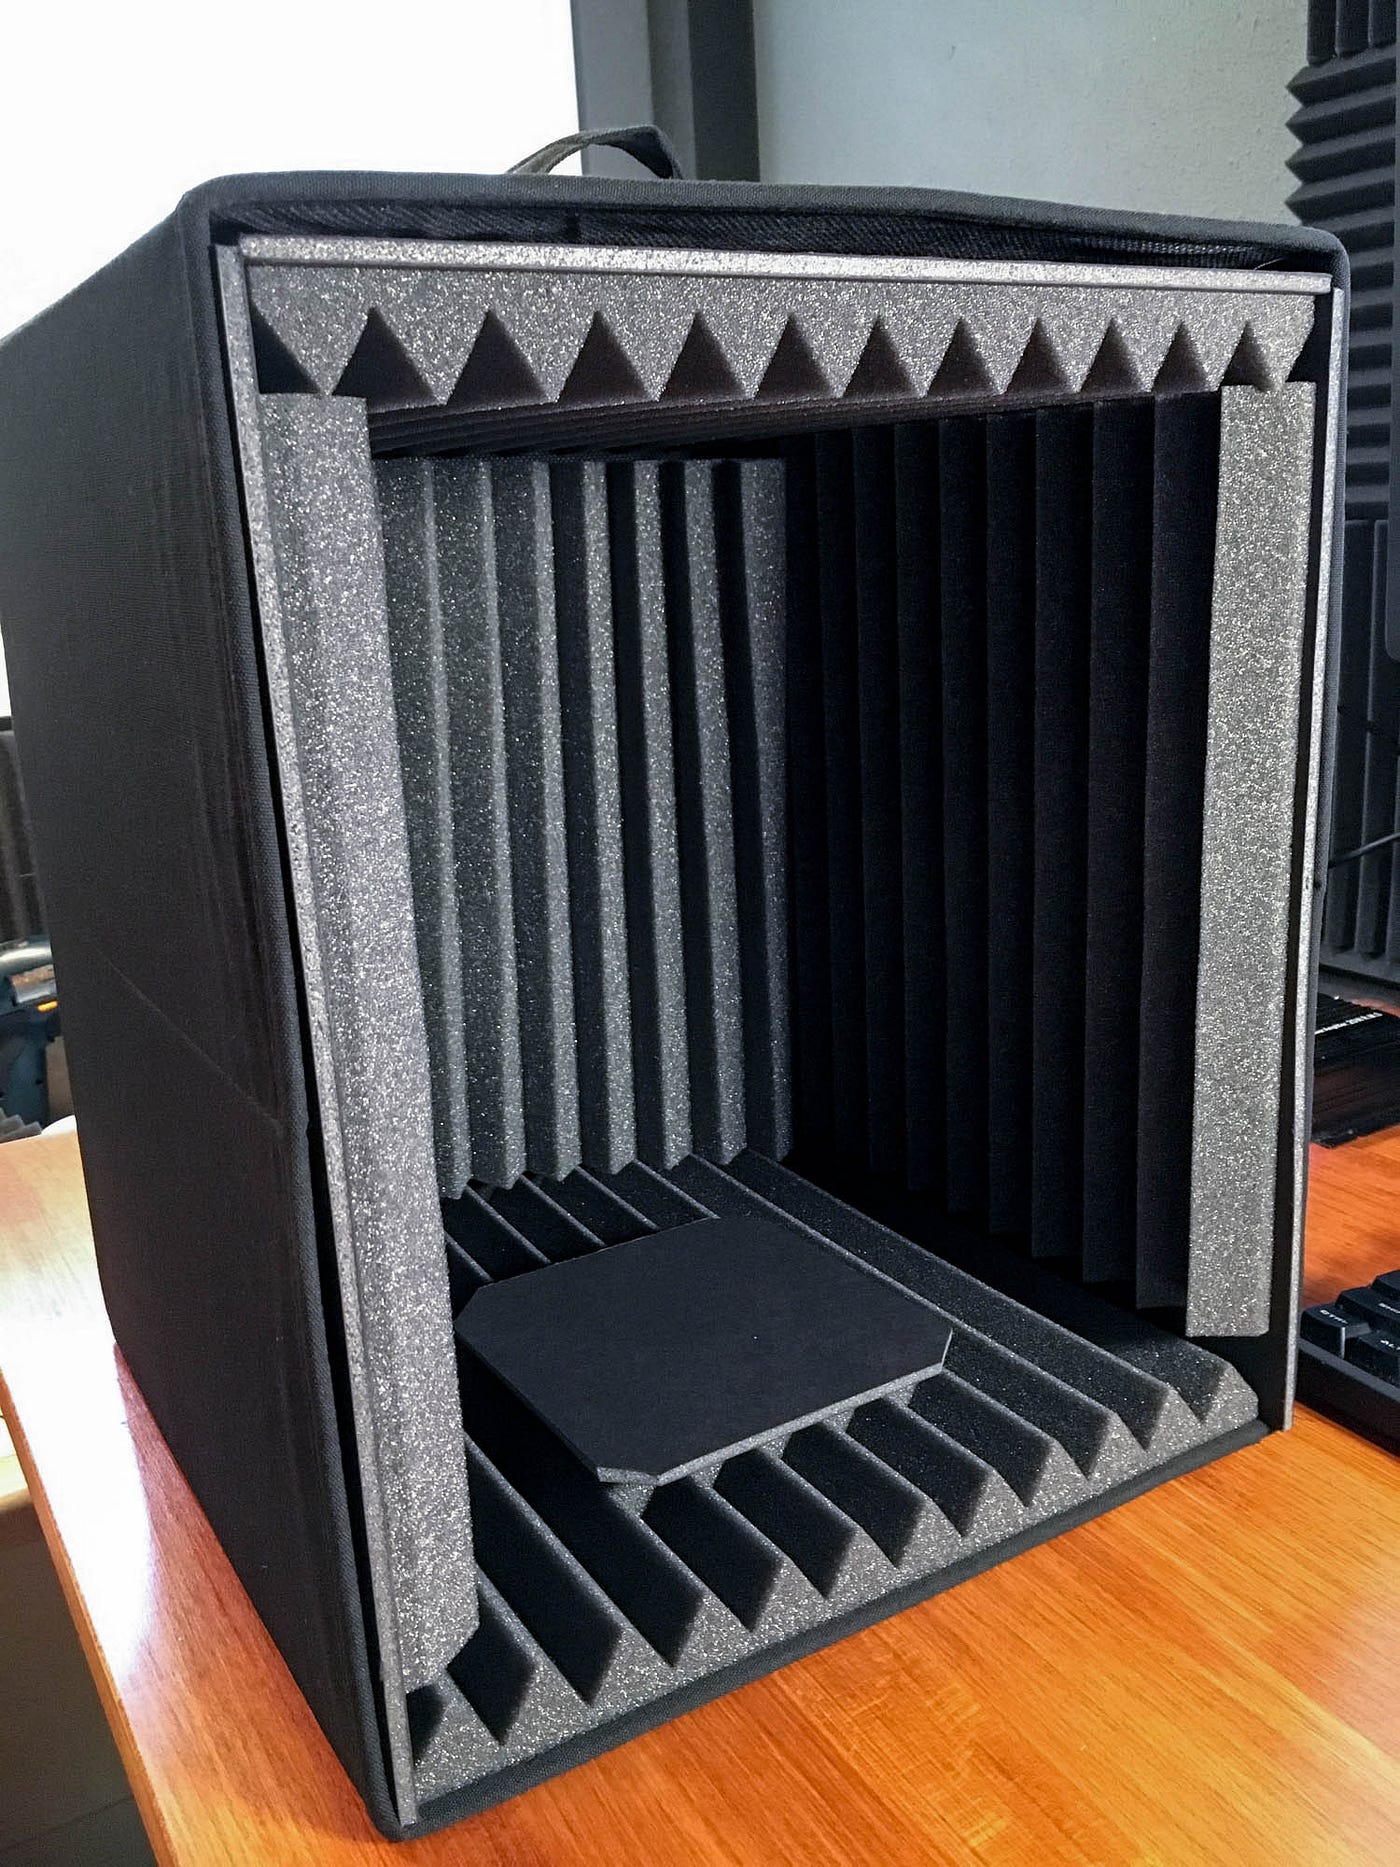 DIY $20 Microphone Isolation Box For Podcasting | by Allan White | Medium